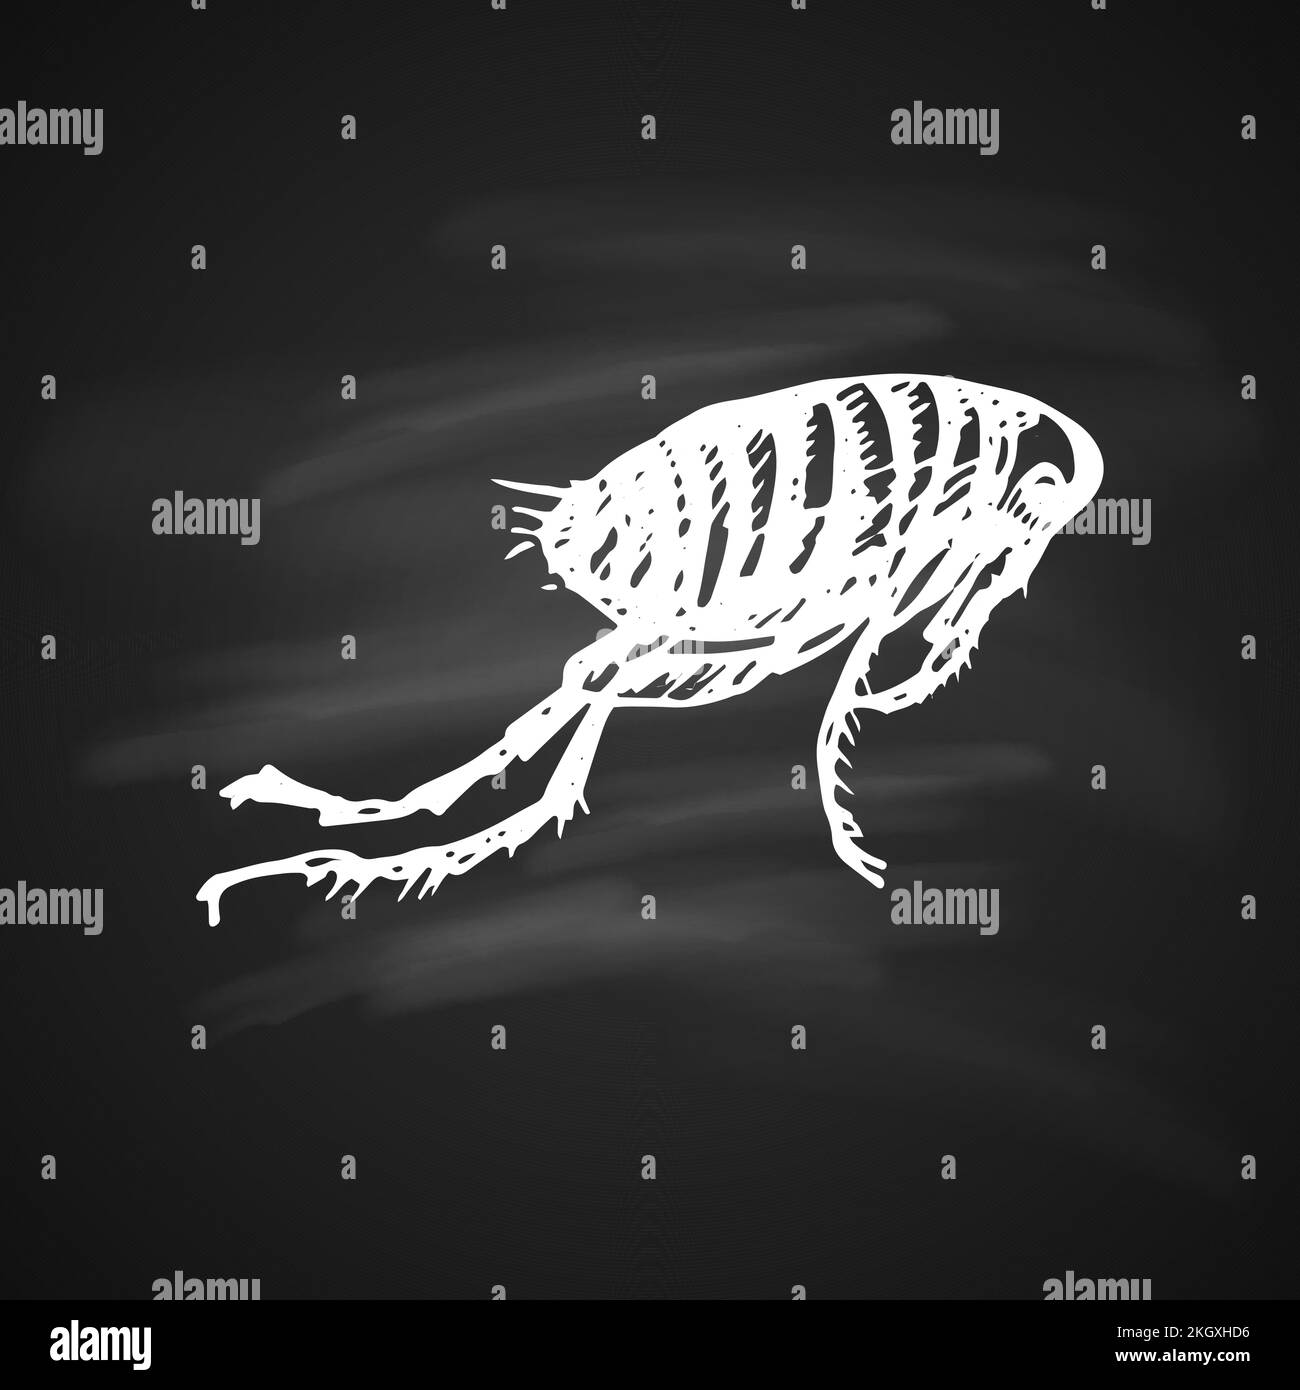 Chalkboard Illustrations of Black Fleas Icon. Isolated Silhouette on a Black Background Stock Vector